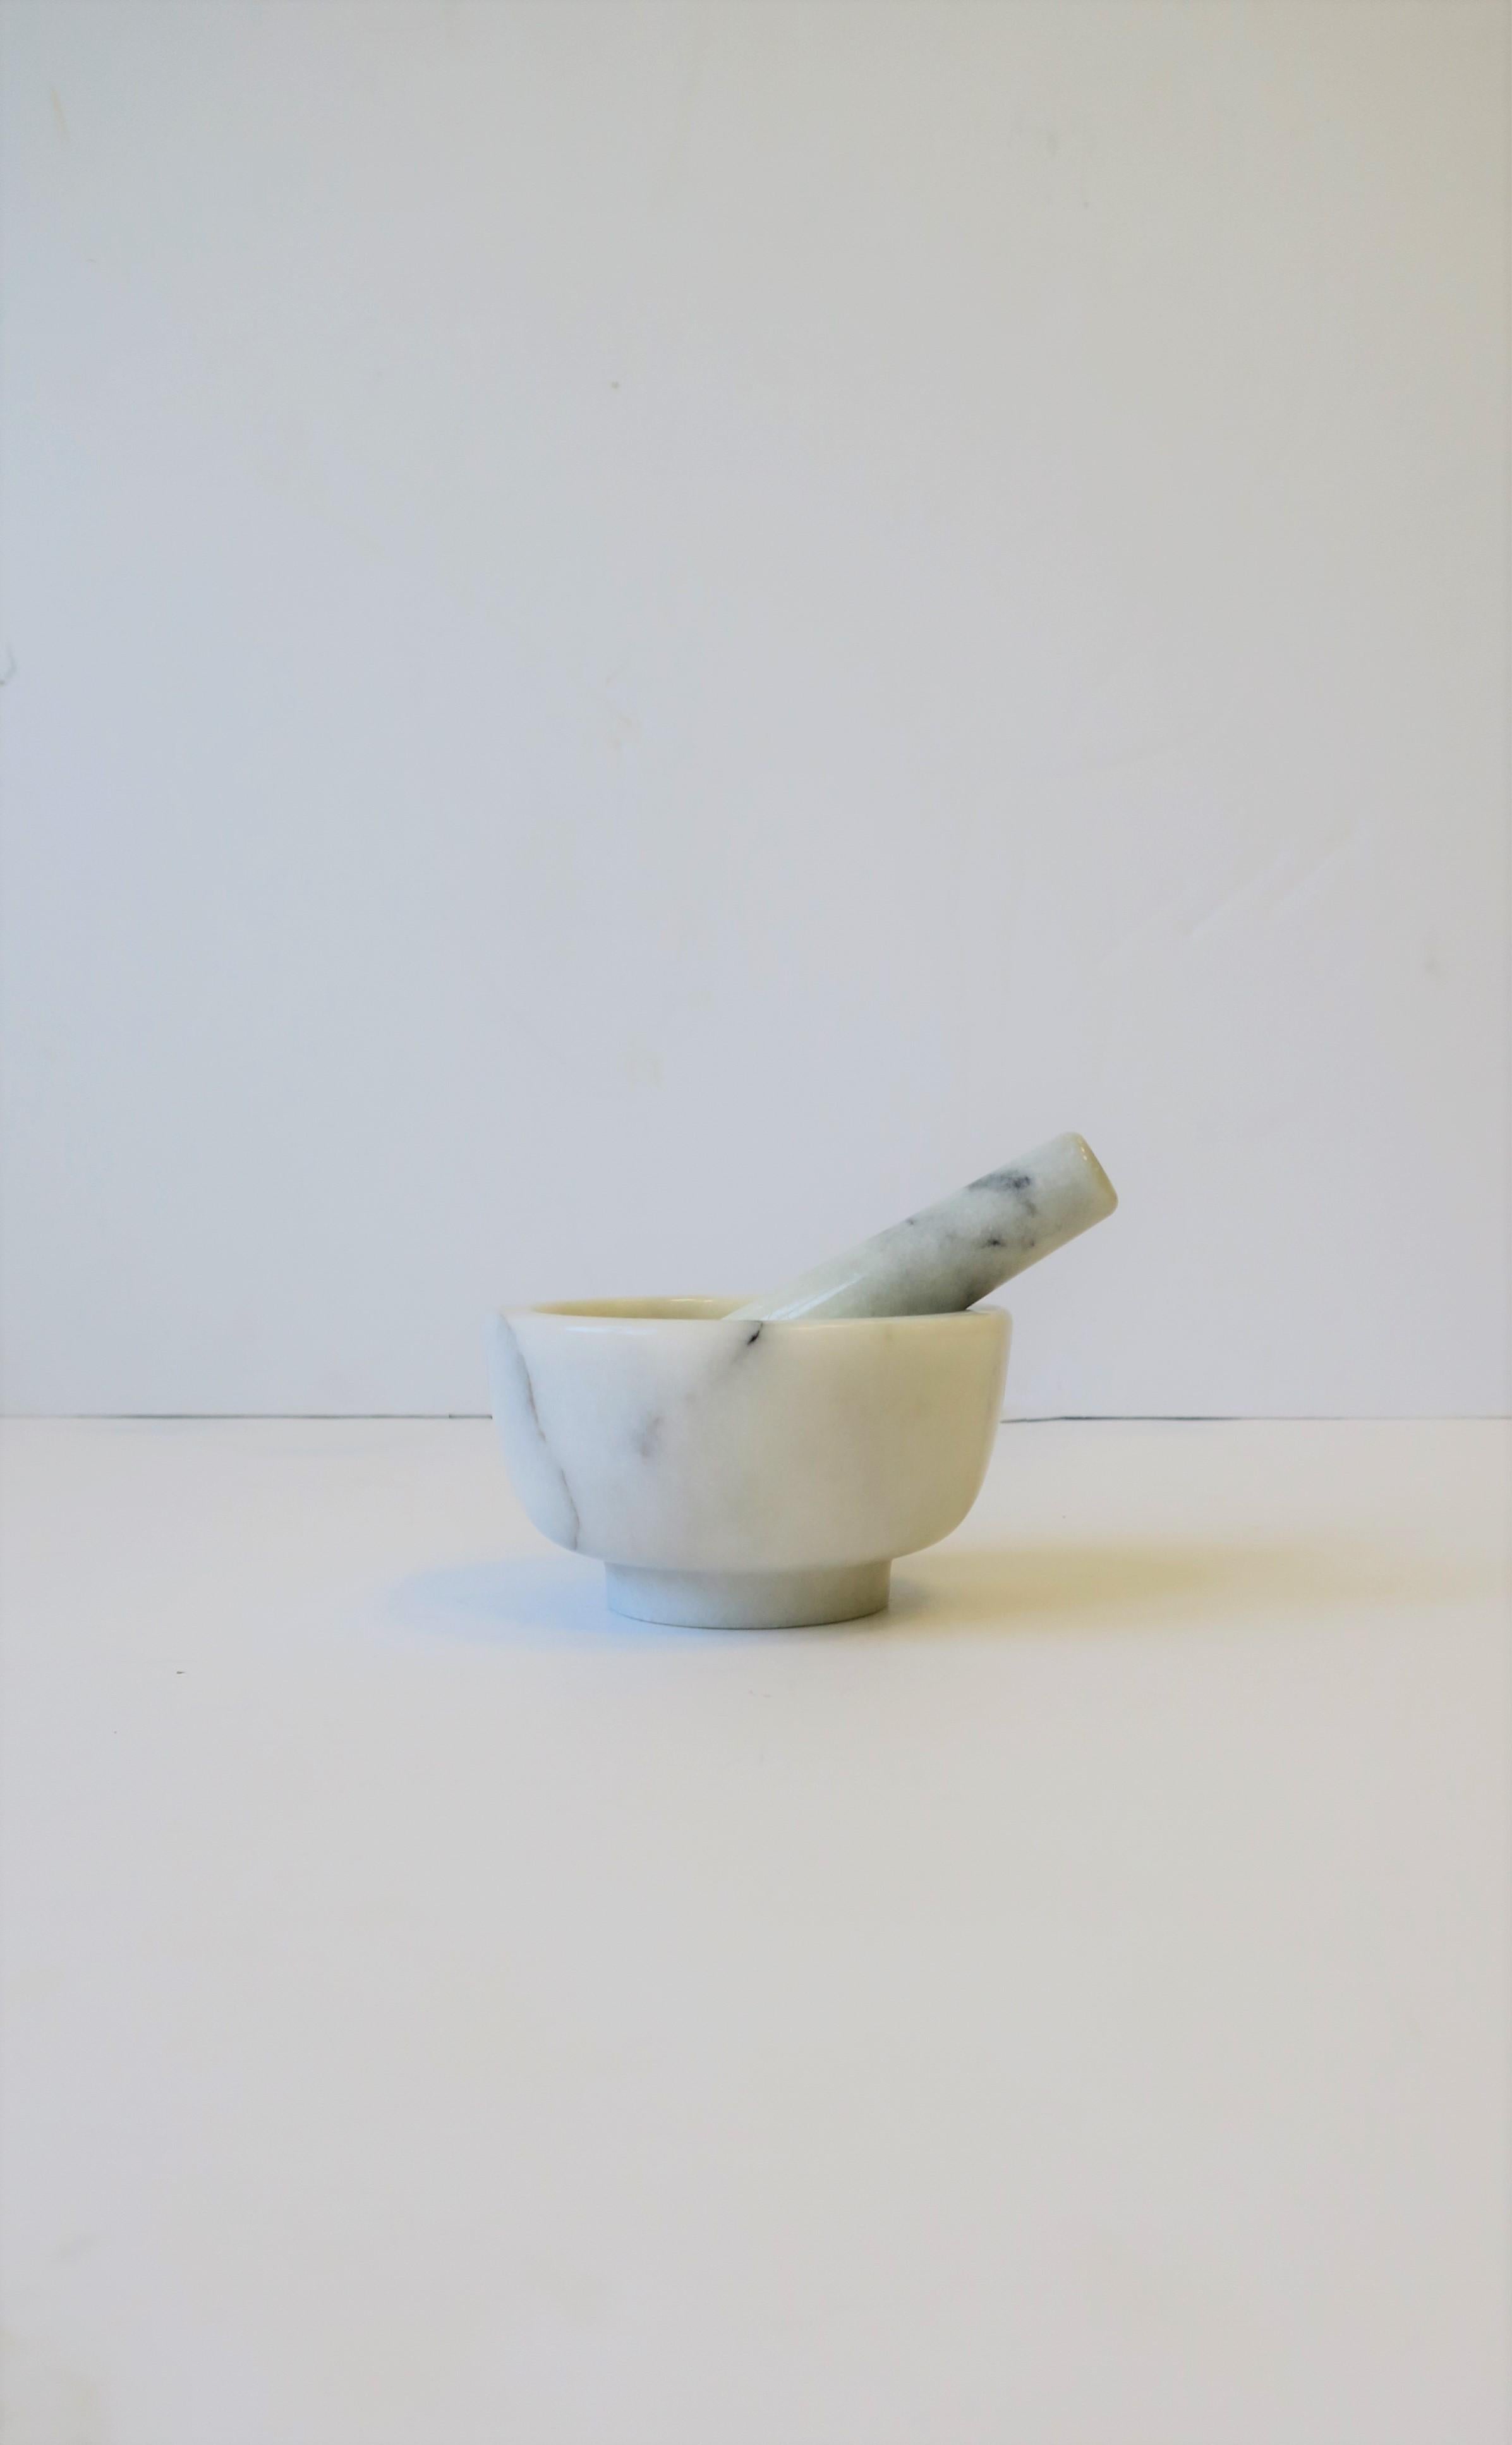 A small, substantial, vintage Italian Carrara marble mortar and pestle, circa late-20th century, Italy. A great kitchen or bar accessory and a necessity. Marble is predominately white with black veining. Piece is well made with marble mortar at 1/2